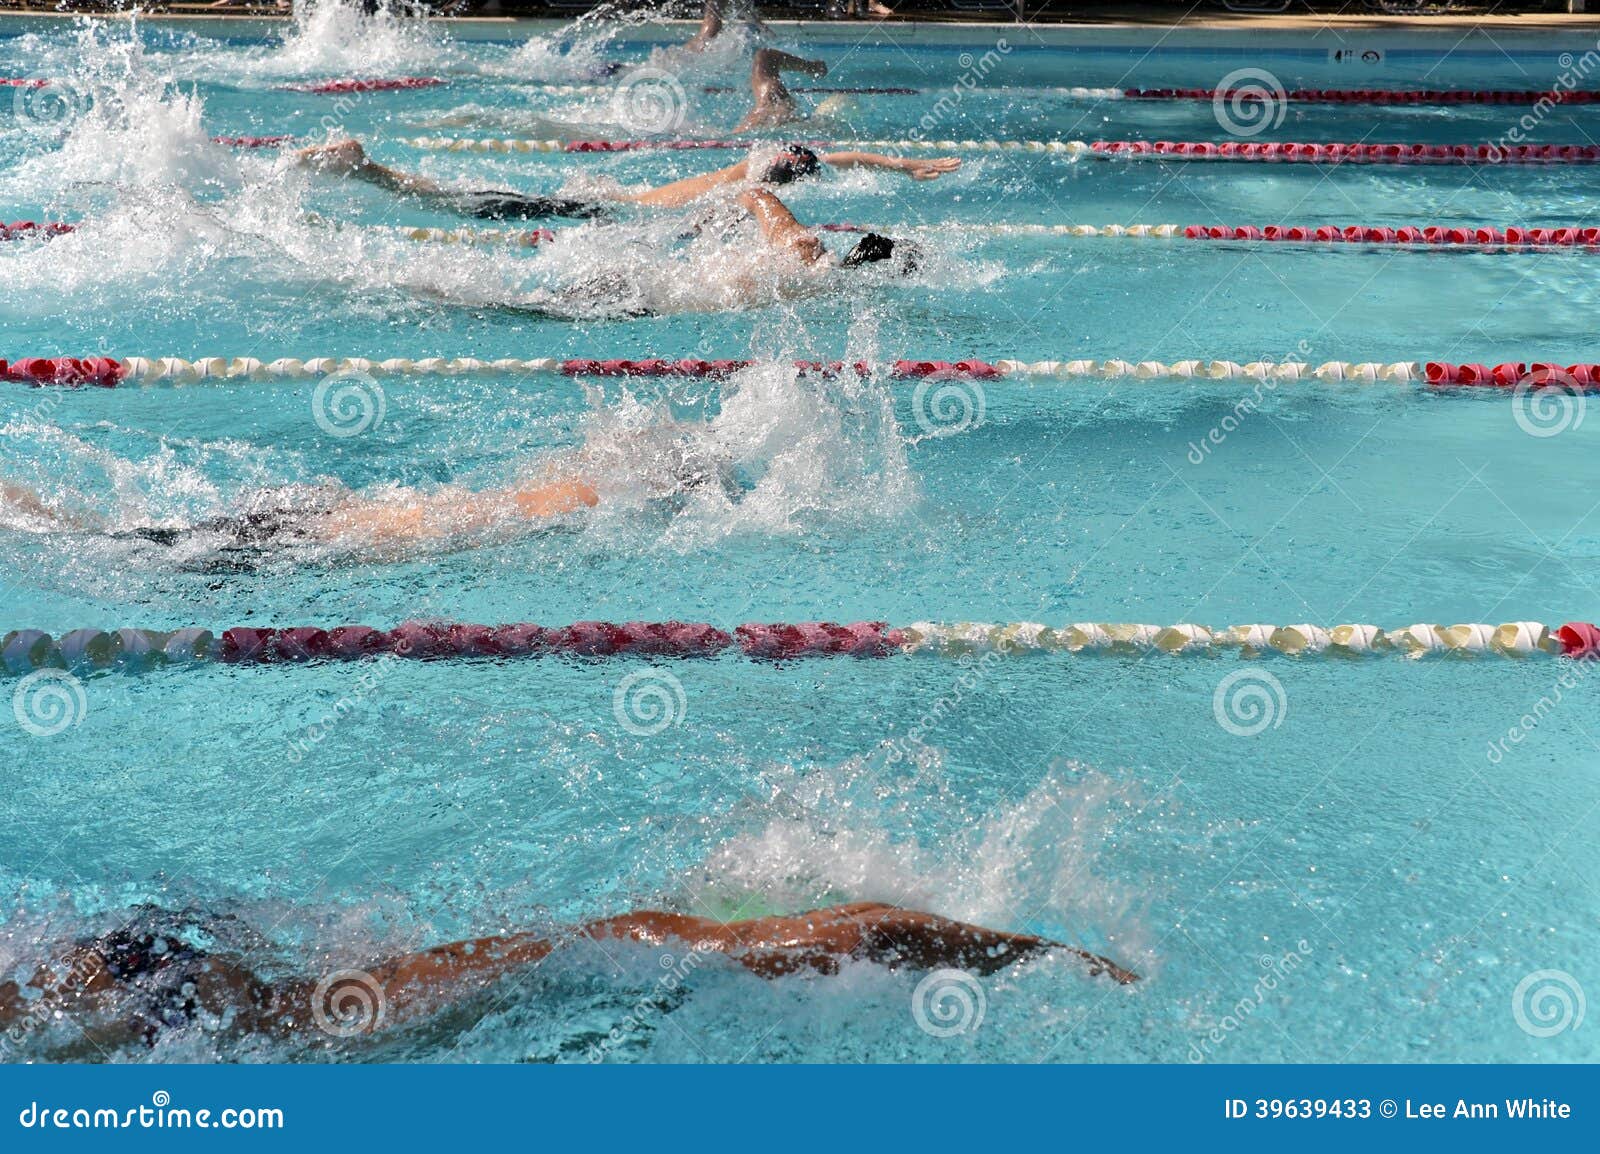 a heat of freestyle swimmers racing at a swim meet